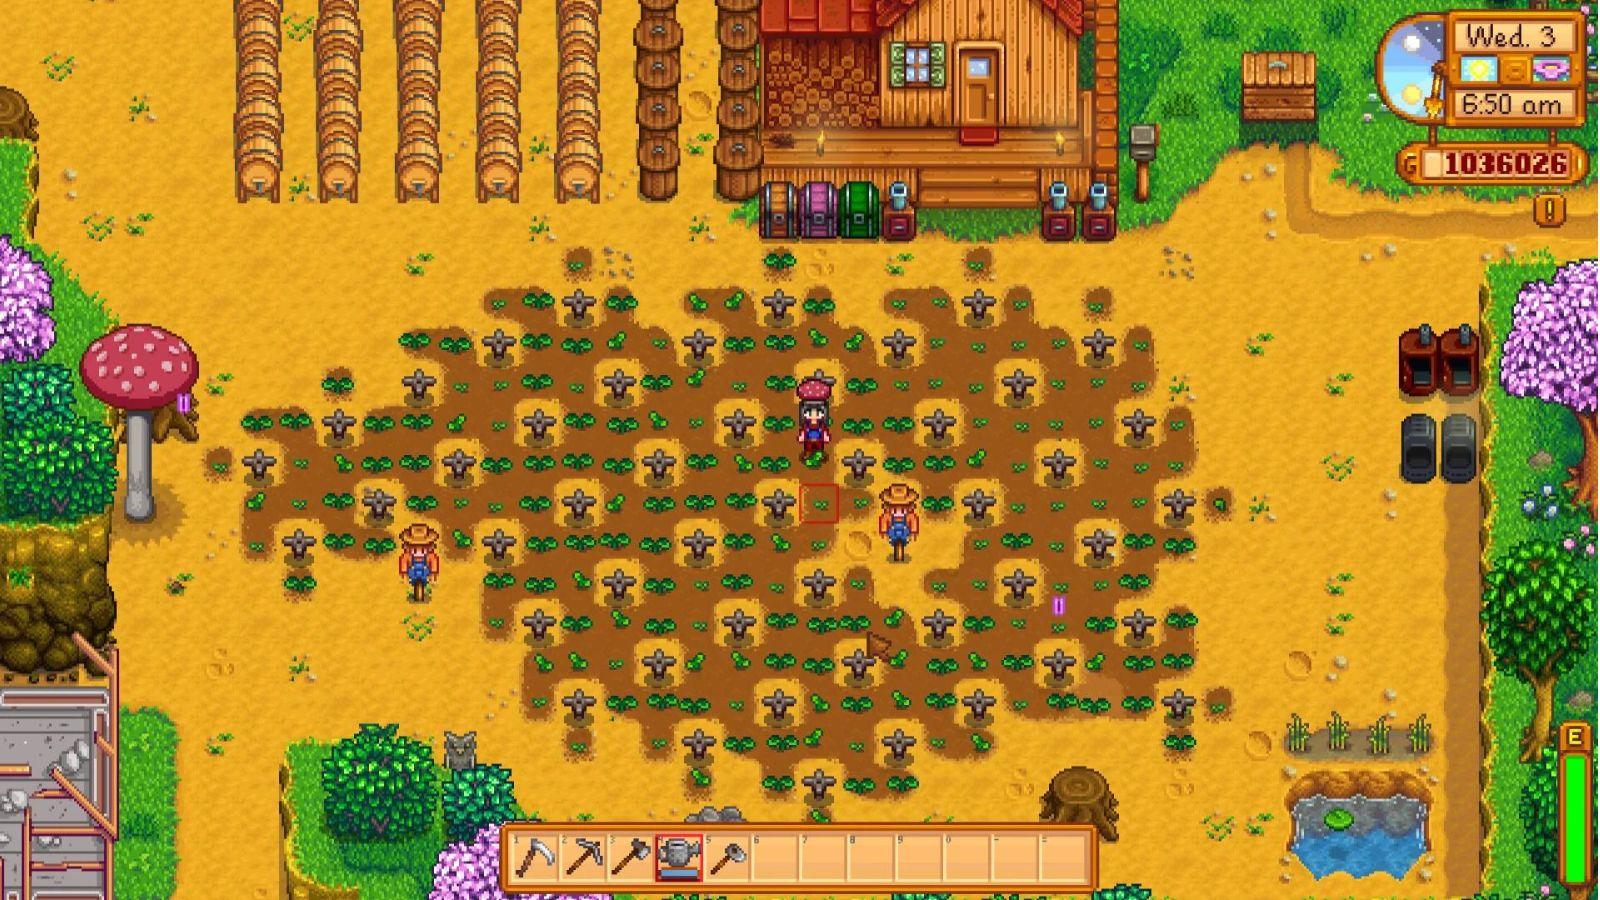 Stardew Valley player earns 1 million without leaving f arm